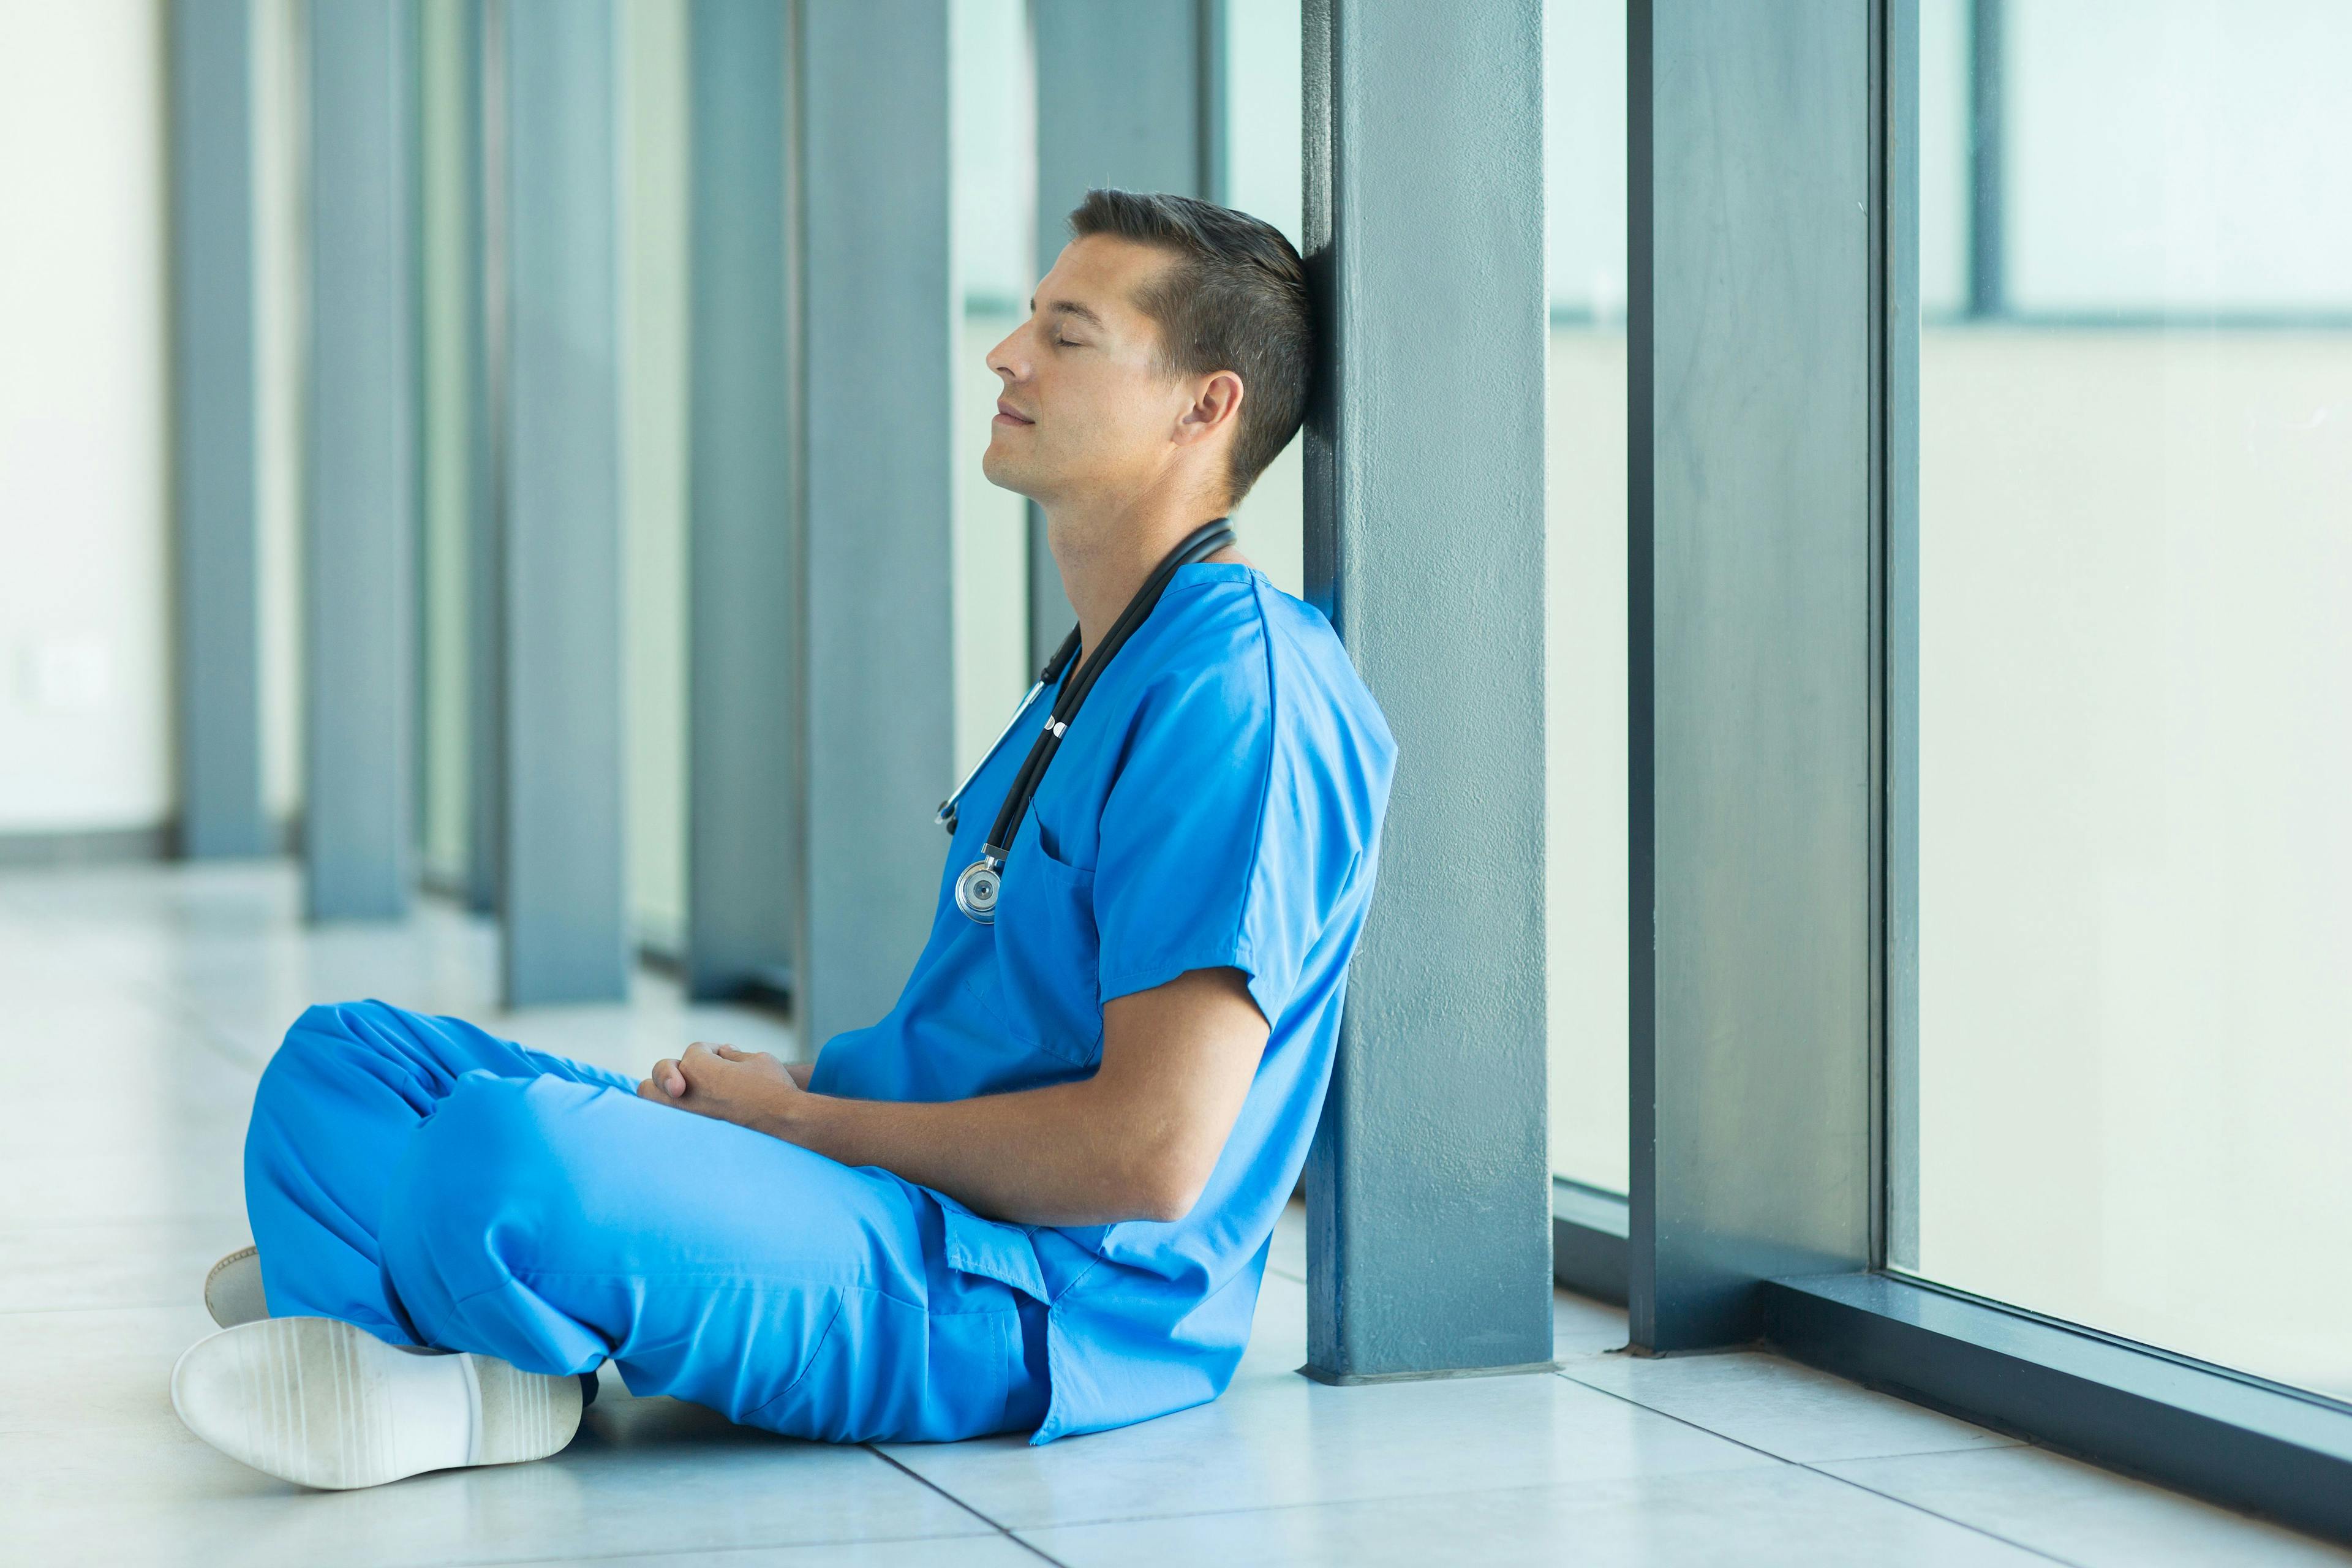 MGMA: Practices still struggling with staffing challenges